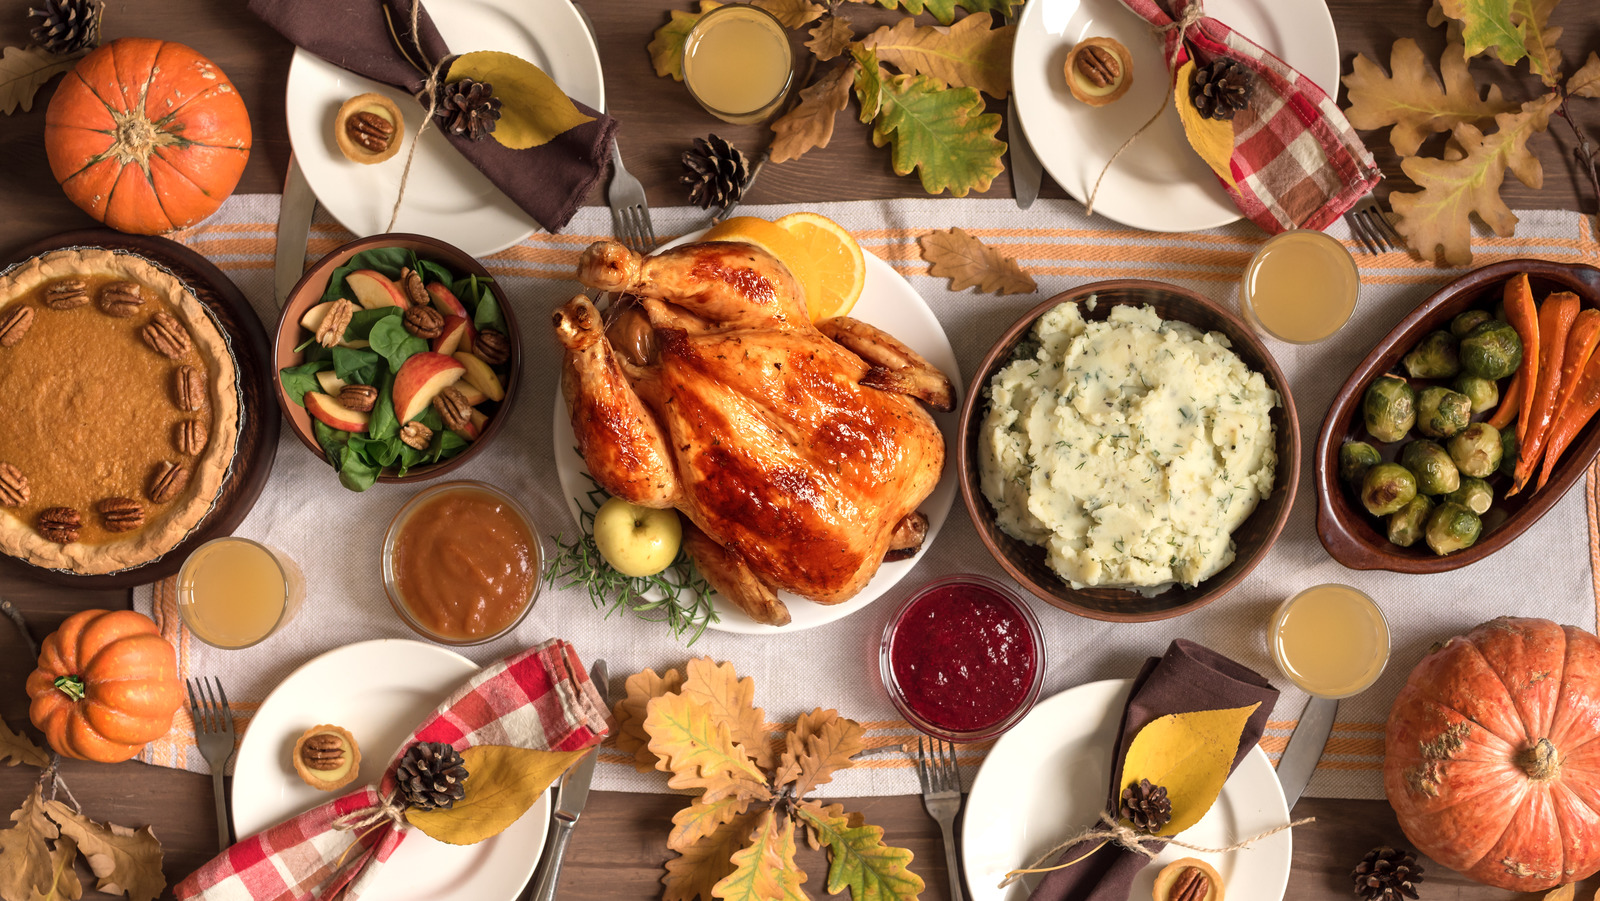 The Thanksgiving Day Foods That People Hate Cooking More Than Turkey